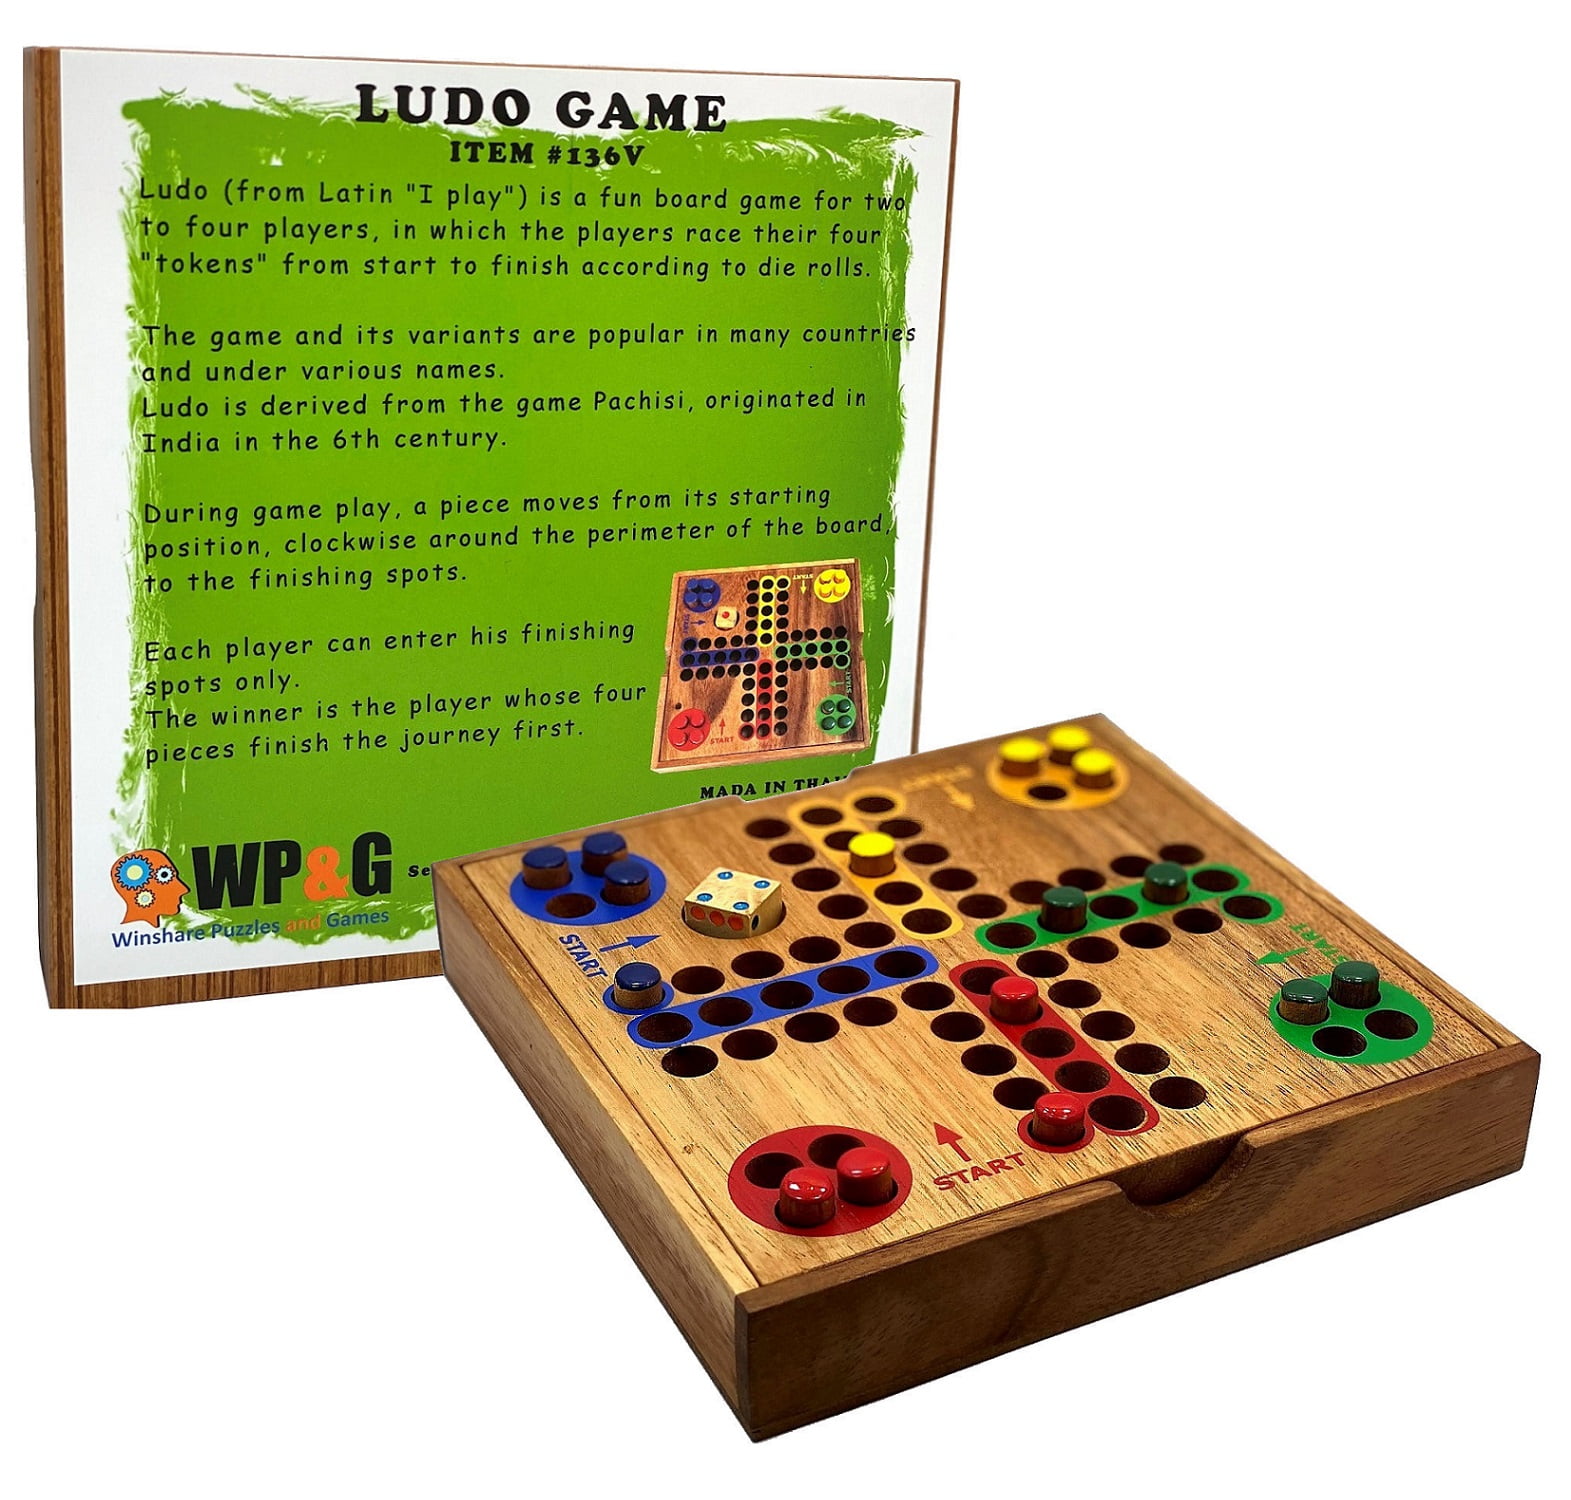 Ludo Classic with Friends on the App Store